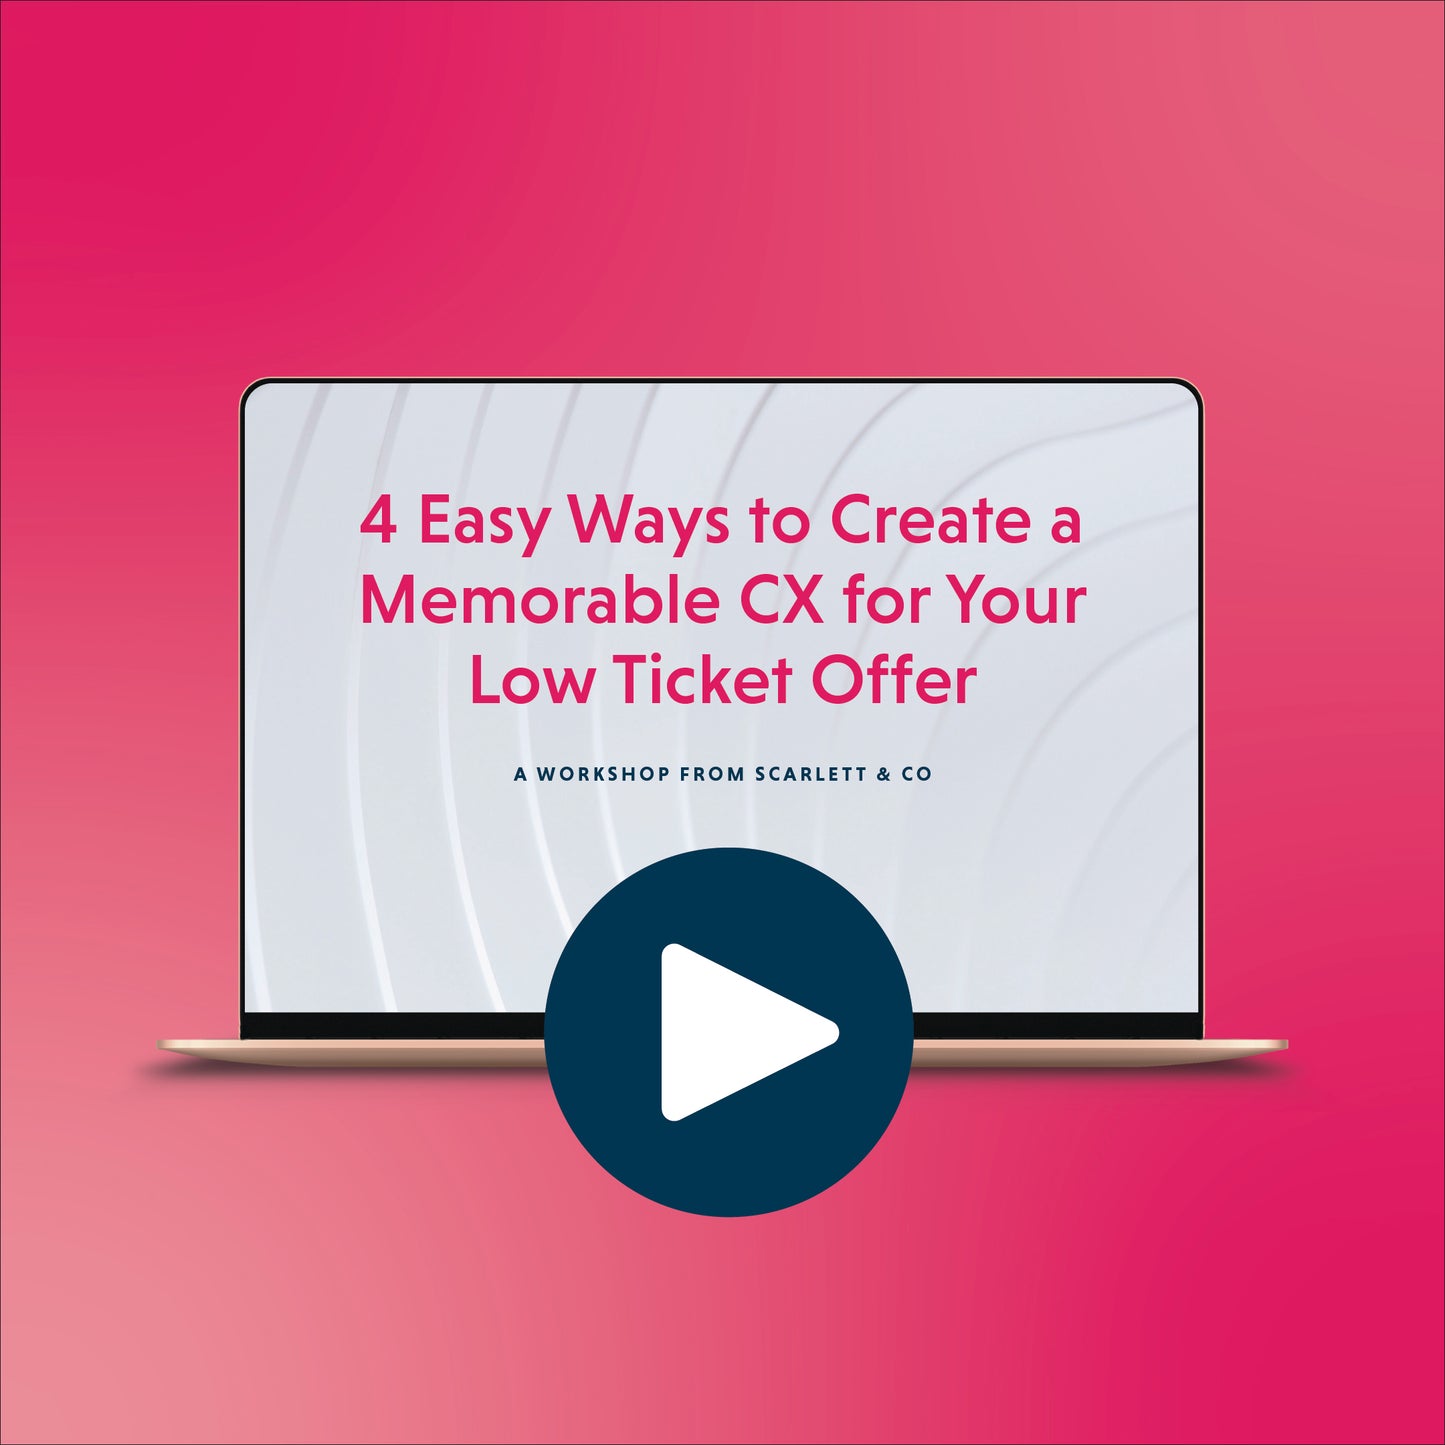 4 Easy Ways to Create a Memorable CX for Your Low Ticket Offer Workshop